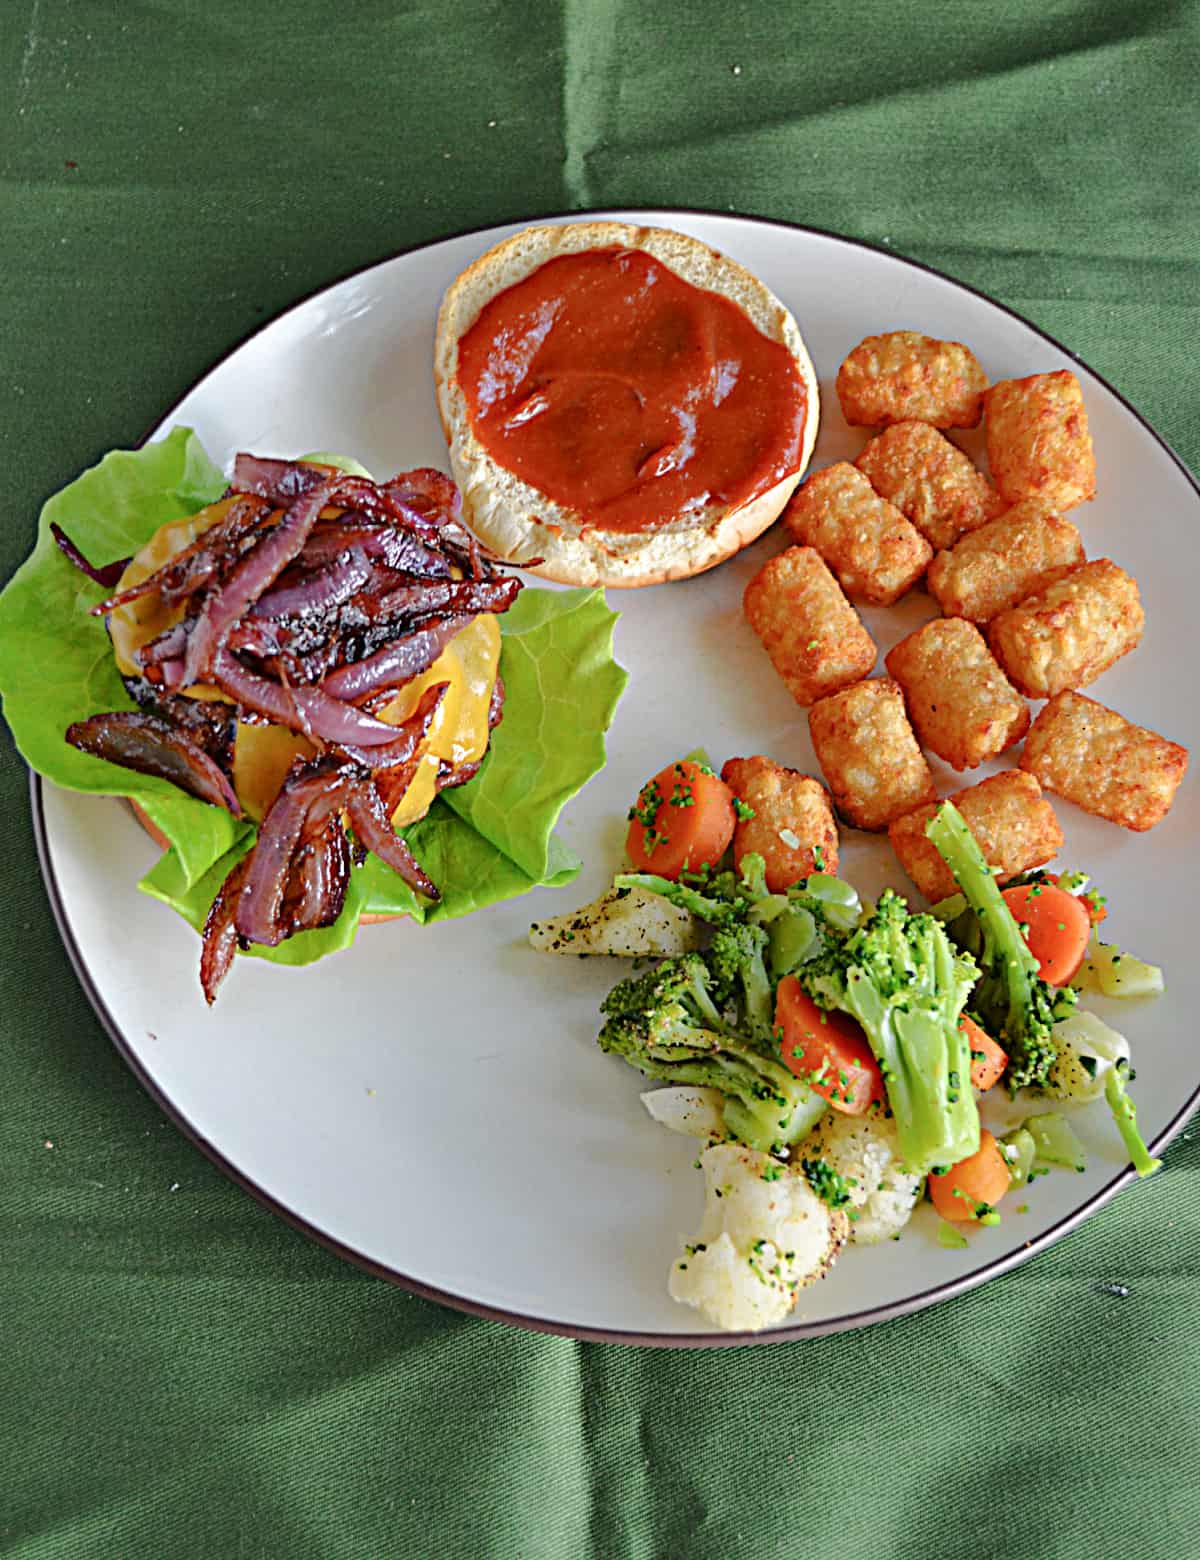 A plate with a burger on a bun, a bun with bourbon BBQ sauce, tater tots, and vegetables.